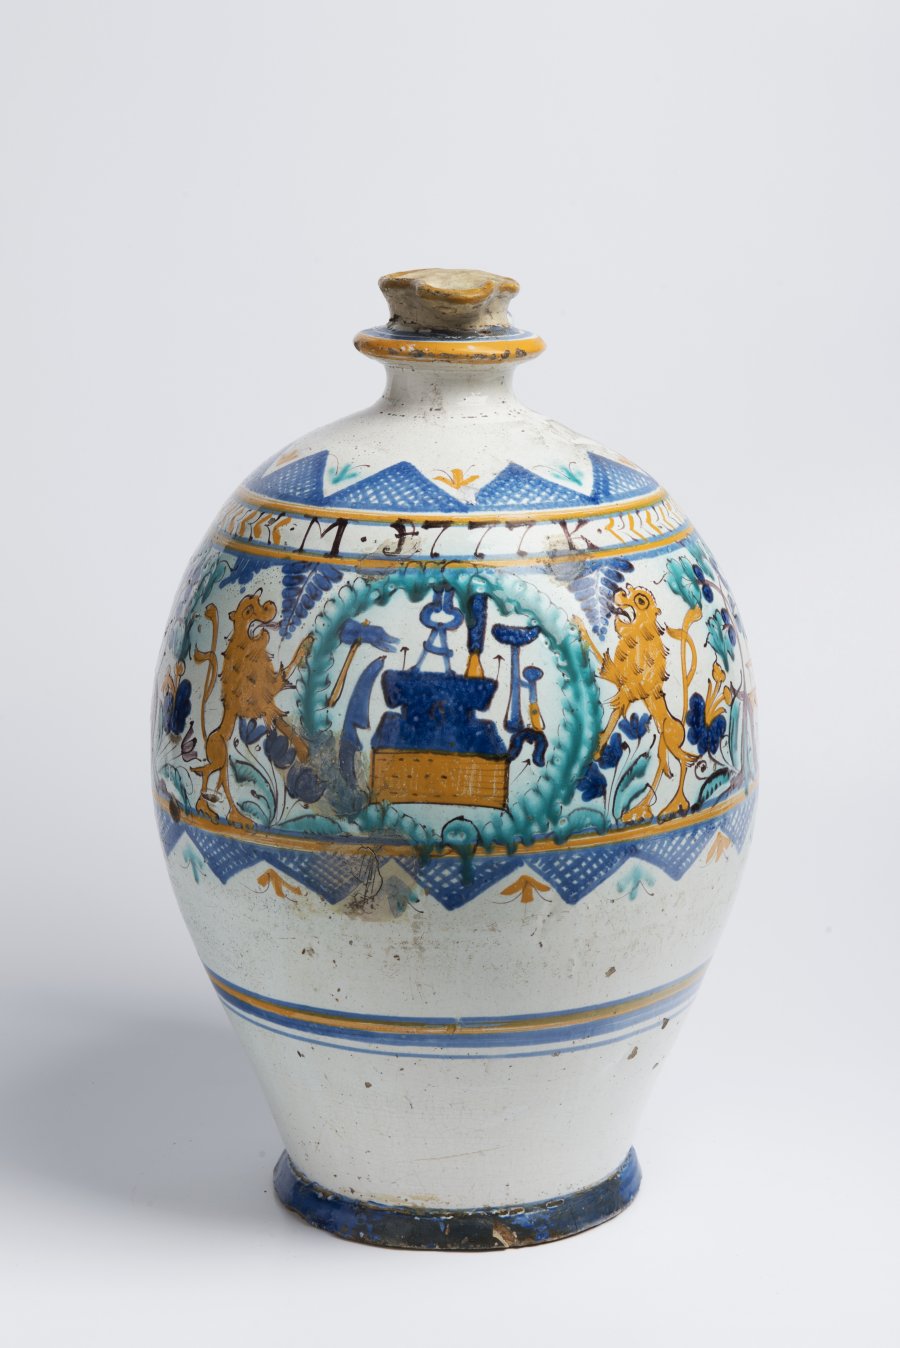 A POST-HABÁN JUG OF THE GUILD OF COOPERS